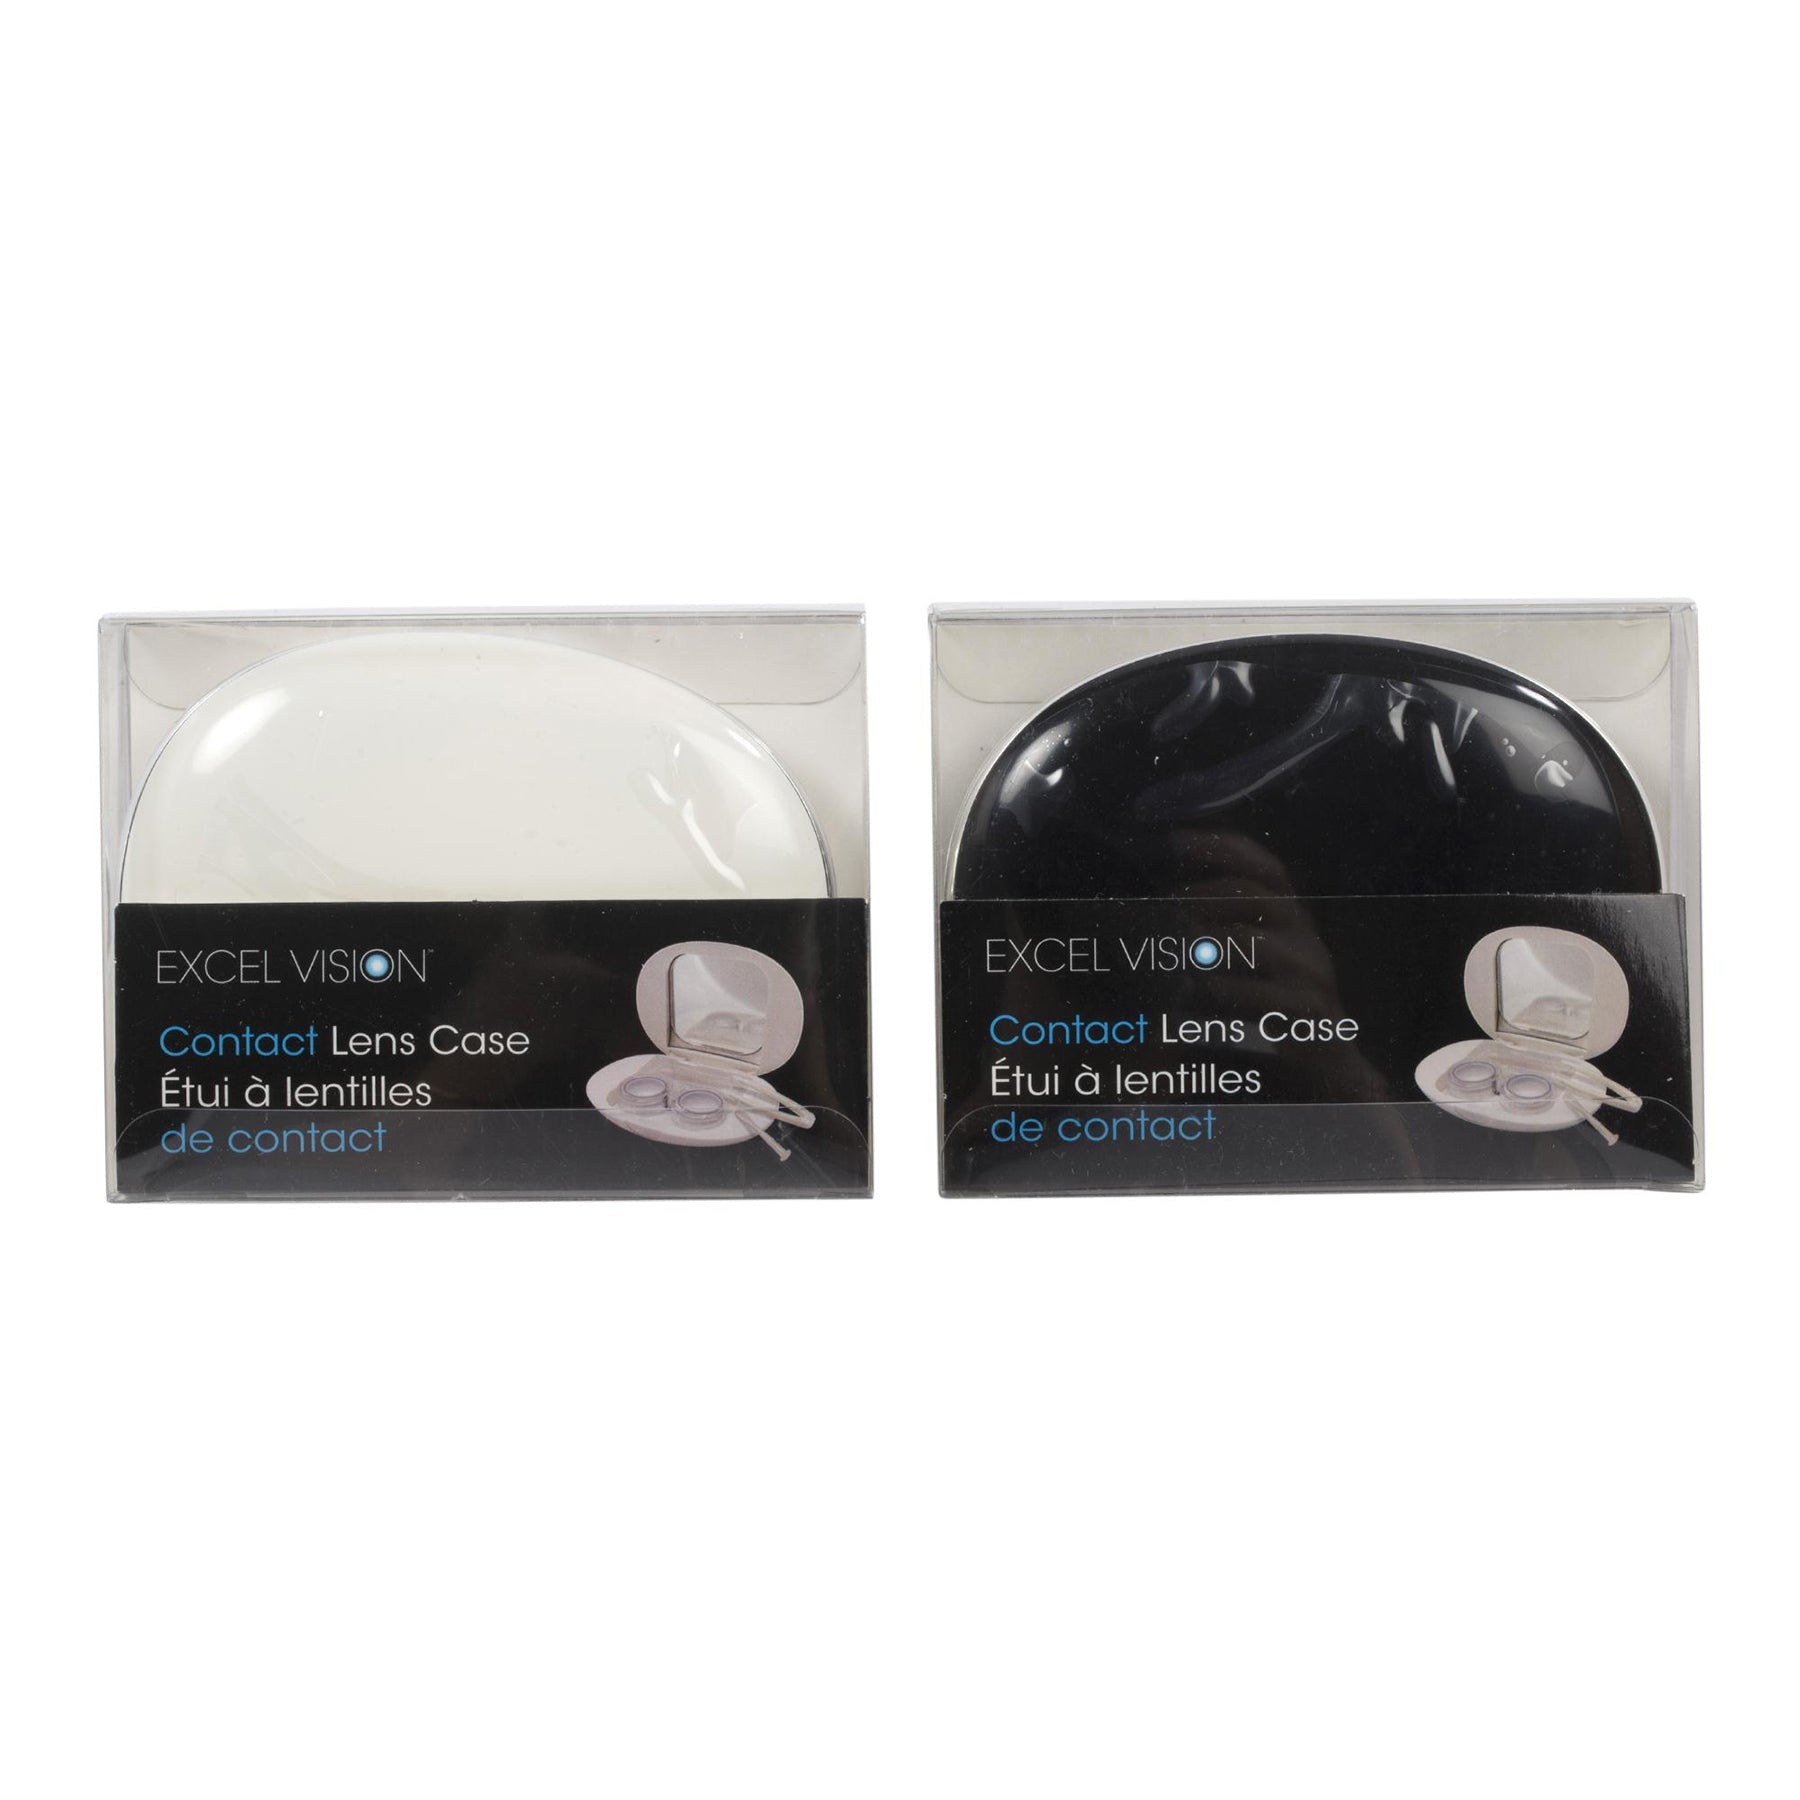 Excel Vision Slim Contact Lens Case 3.8x3in